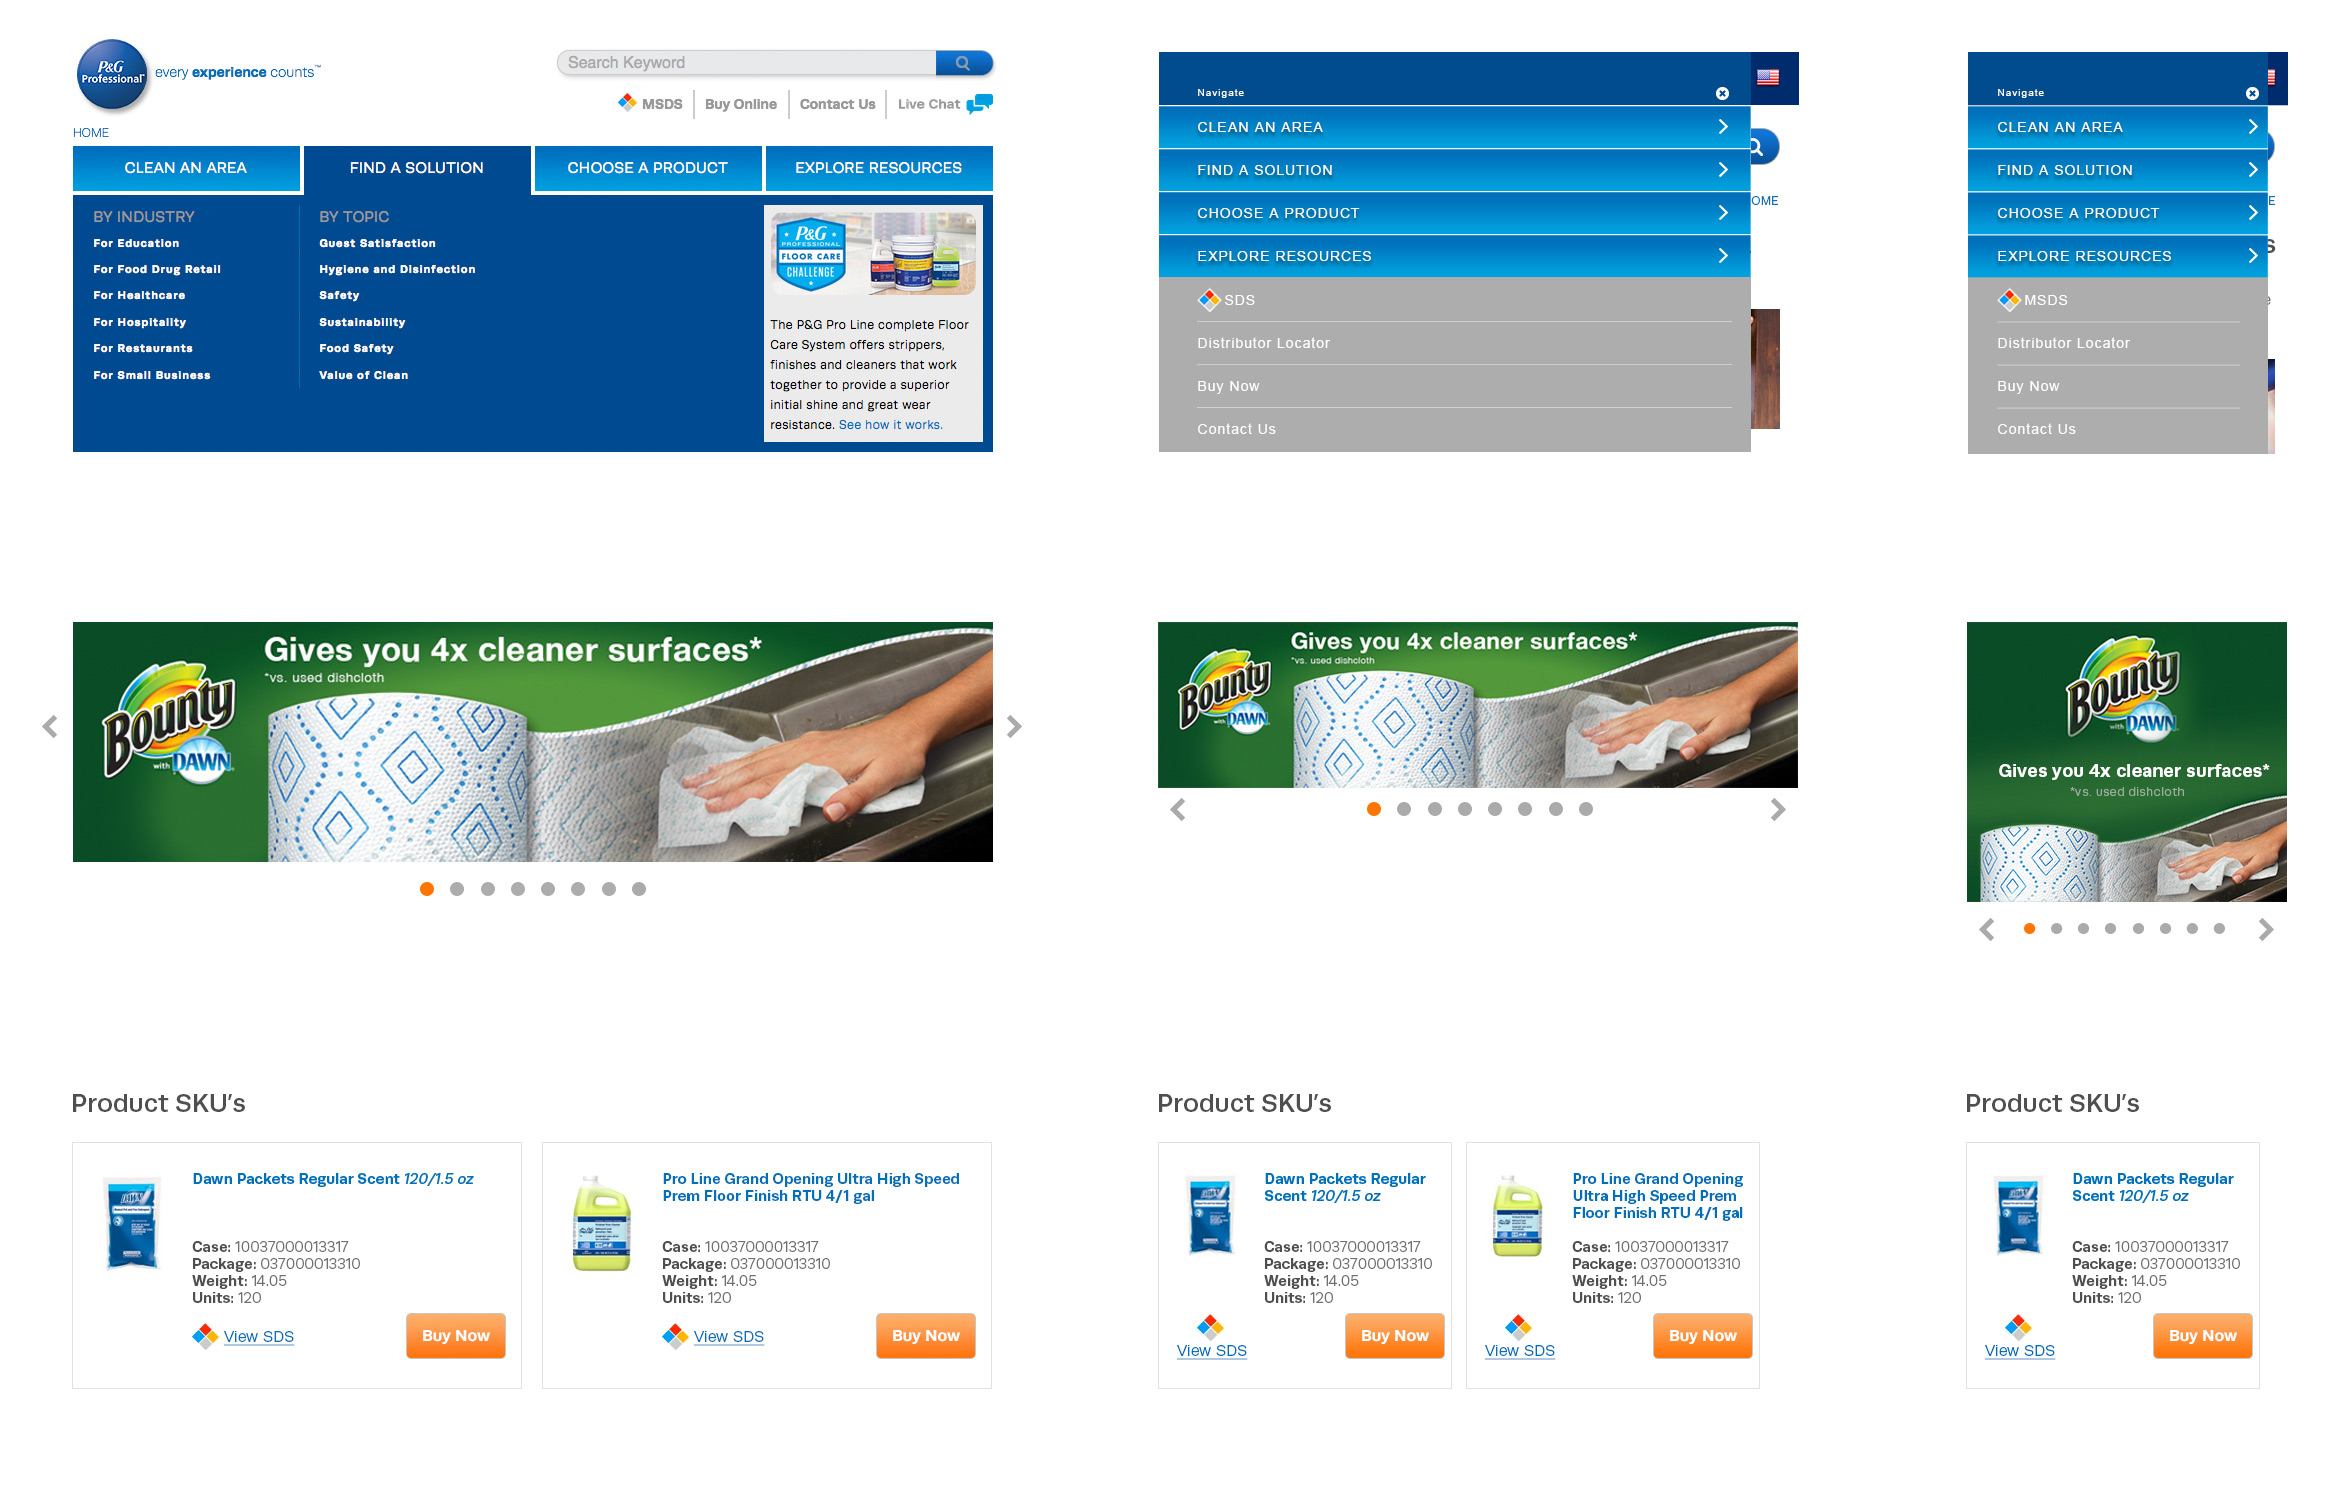 Procter and Gamble web system components